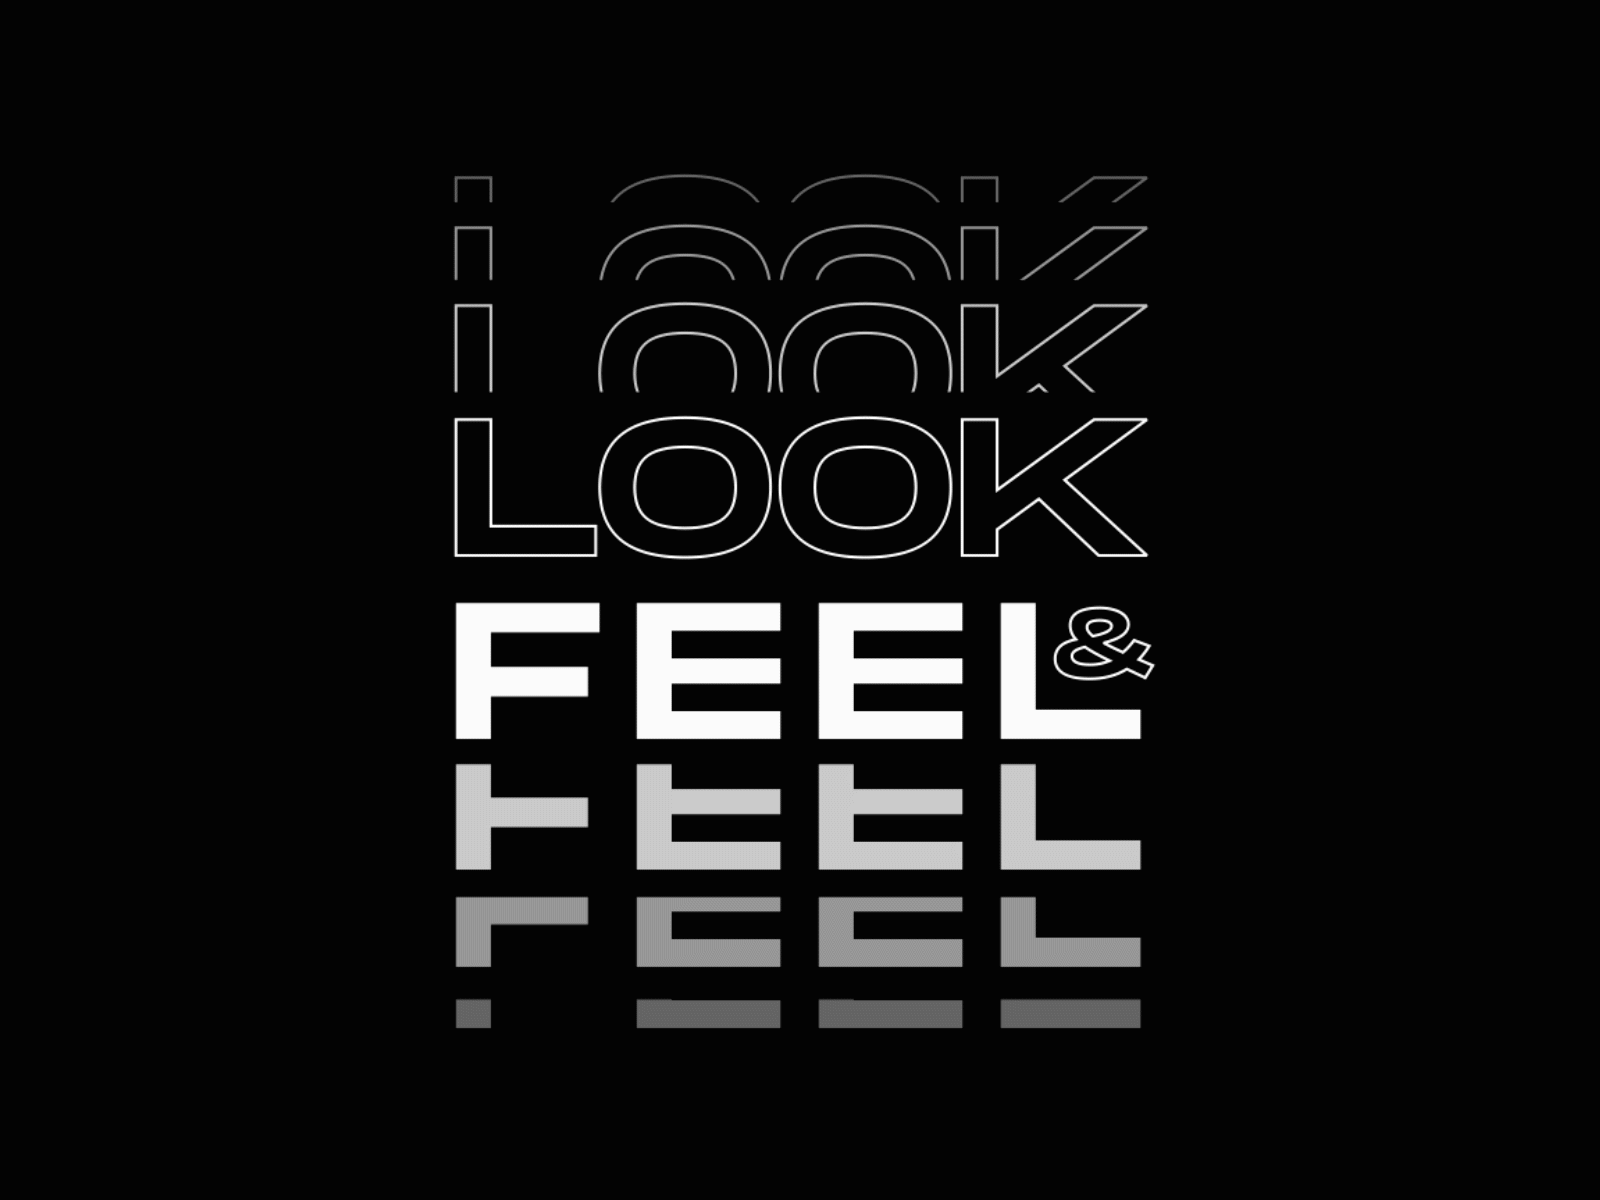 SUNLOOK, LOOK&FEEL CAMPAIGN advertising alvaromelgosa artdirection campaign digital design graphicdesign lettering motiongraphics typography